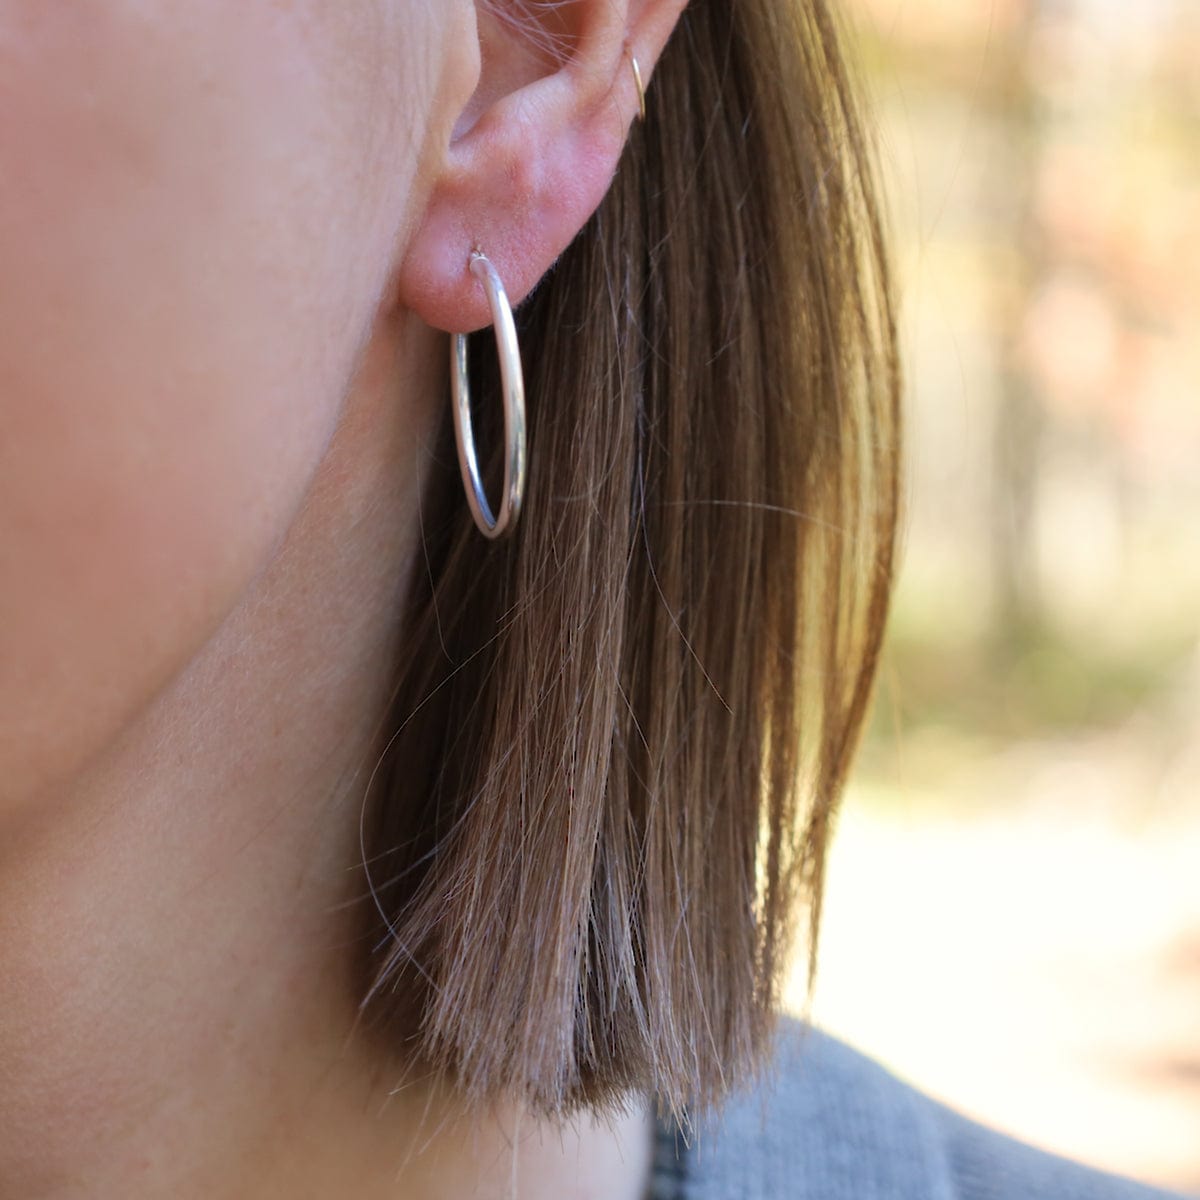 EAR Thick 35mm Sterling Silver Tube Hoop